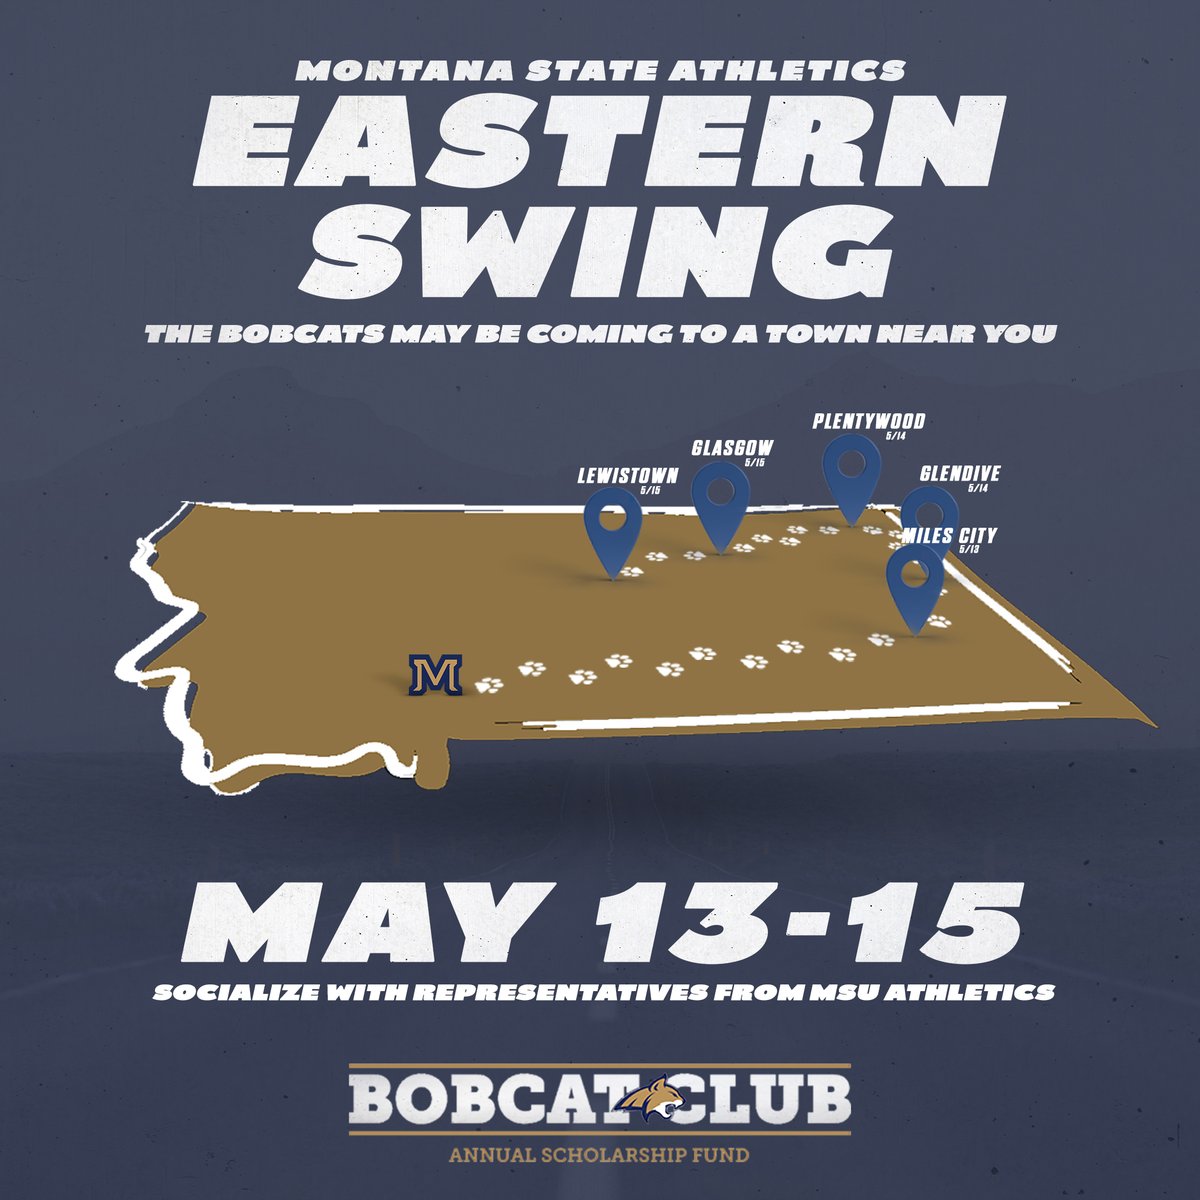 Our Eastern Swing begins is just a couple weeks away! Join Bobcat coaches and Admin staff from May 13-15 in a town near you! Miles City (5/13) Glendive (5/14) Plentywood (5/14) Glasgow (5/15) Lewistown (5/15) For more information and to register, visit msubobcatclub.com/events/all-eve…